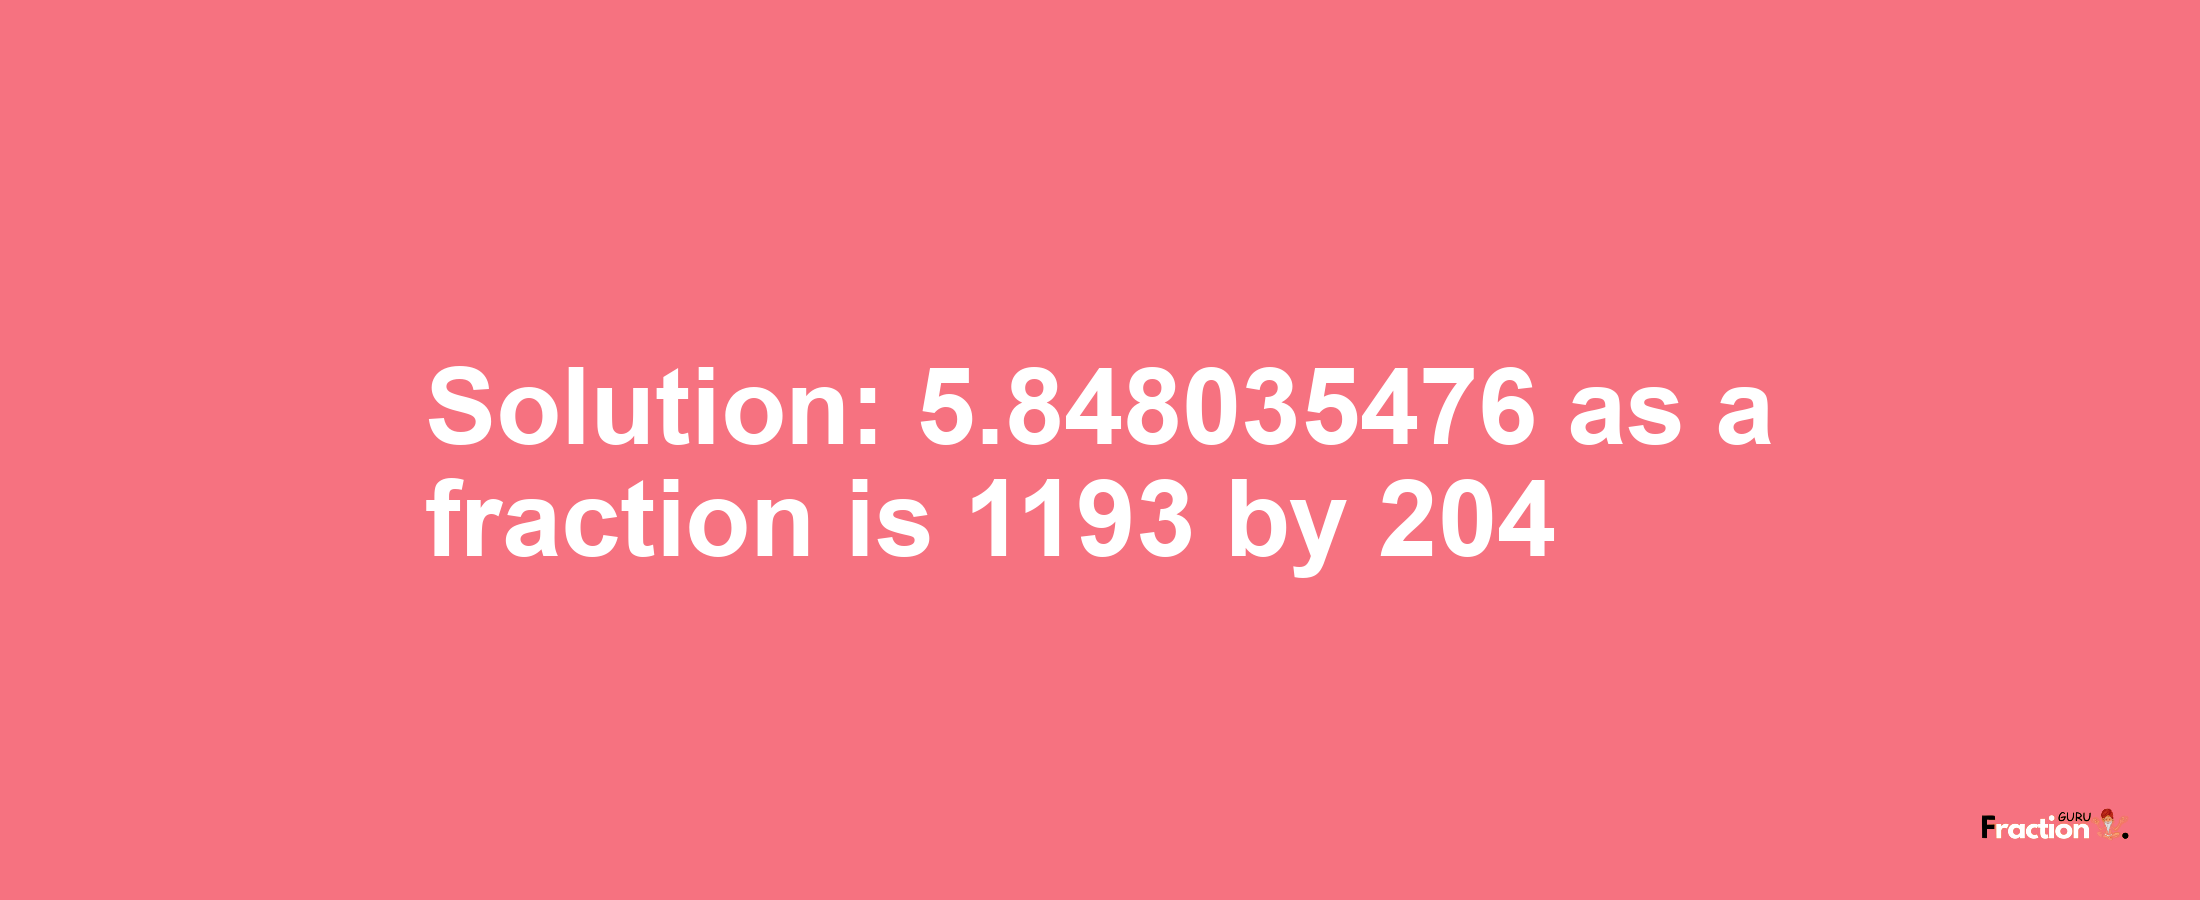 Solution:5.848035476 as a fraction is 1193/204